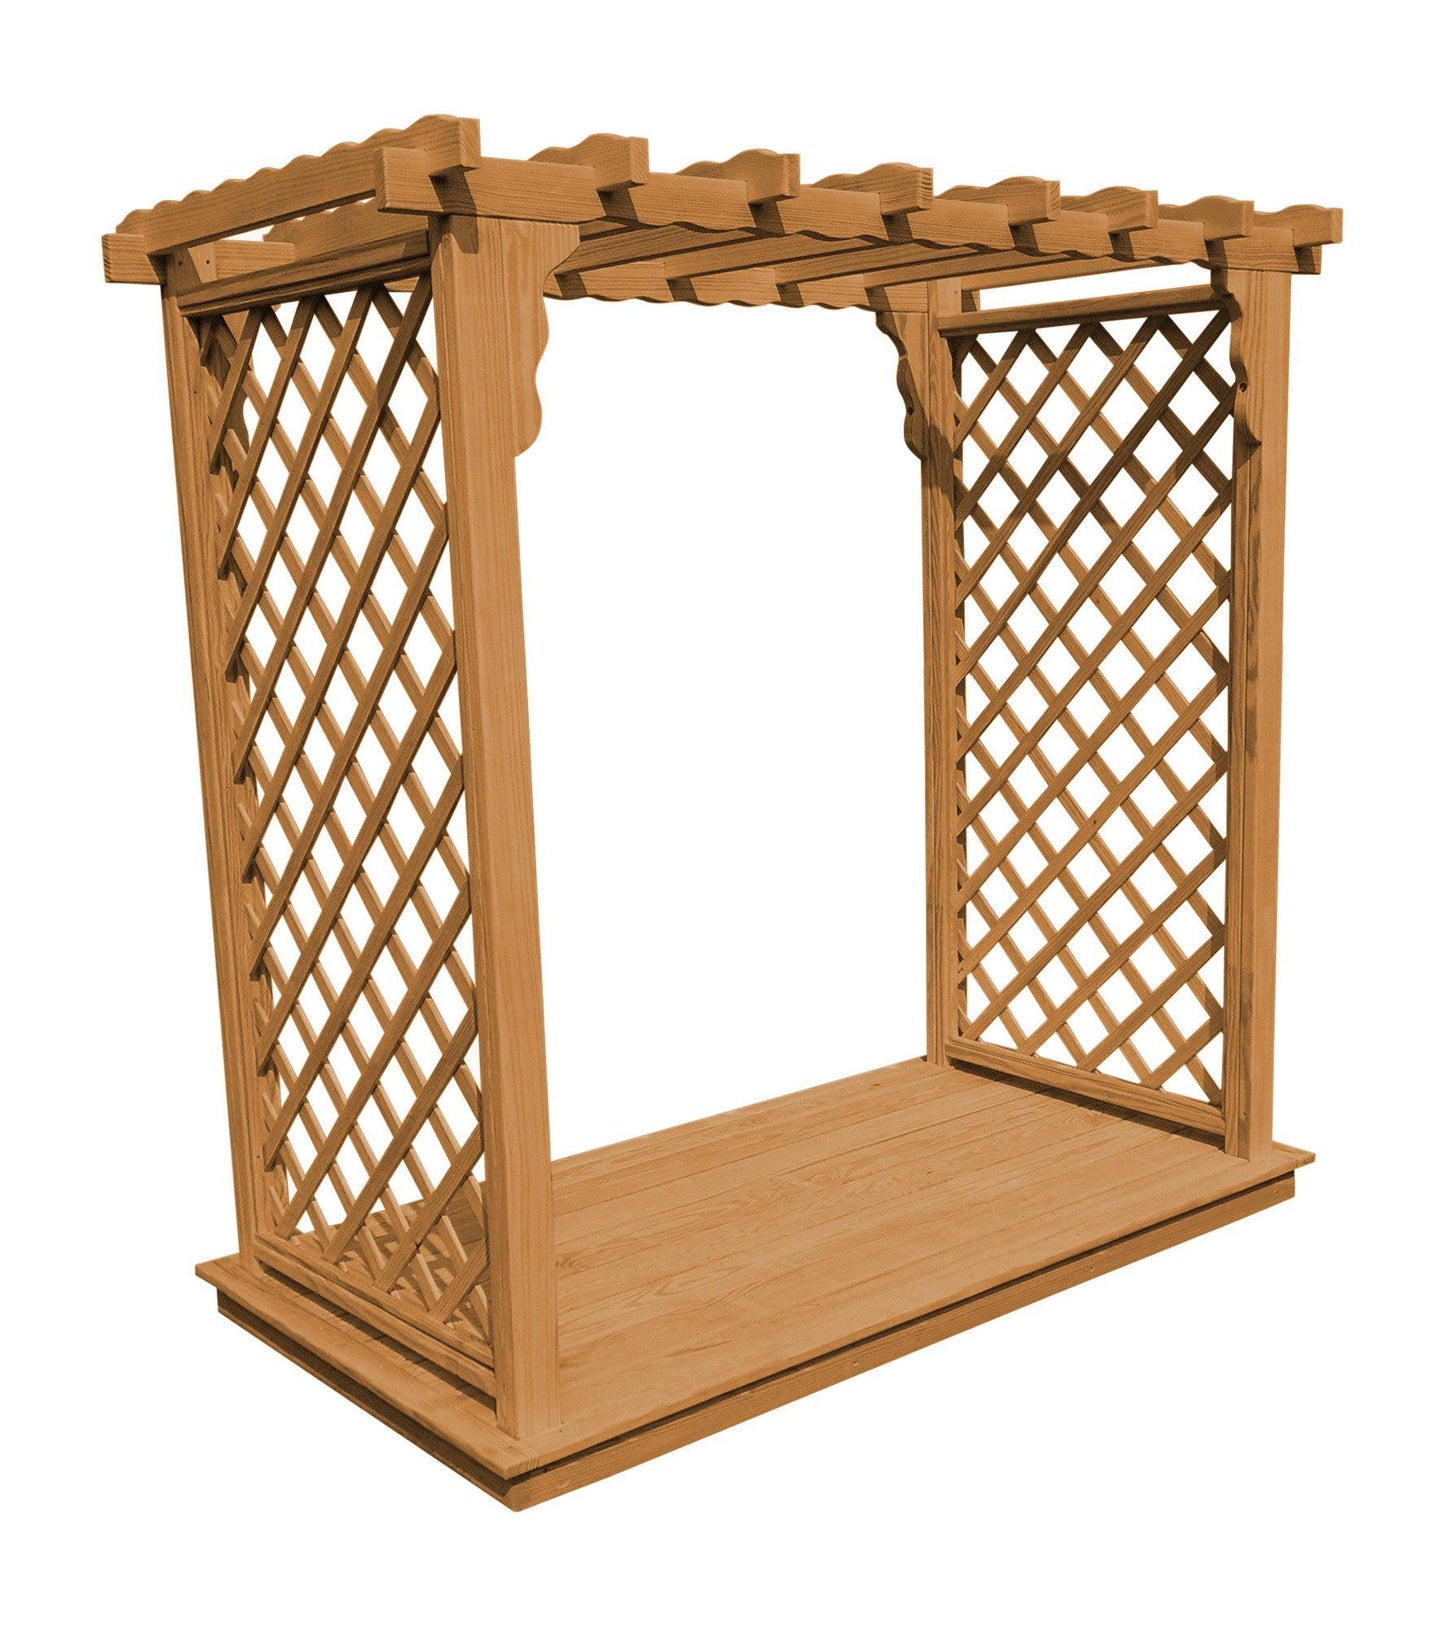 A&L FURNITURE CO. 6' Covington Pressure Treated Pine Arbor & Deck - LEAD TIME TO SHIP 10 BUSINESS DAYS